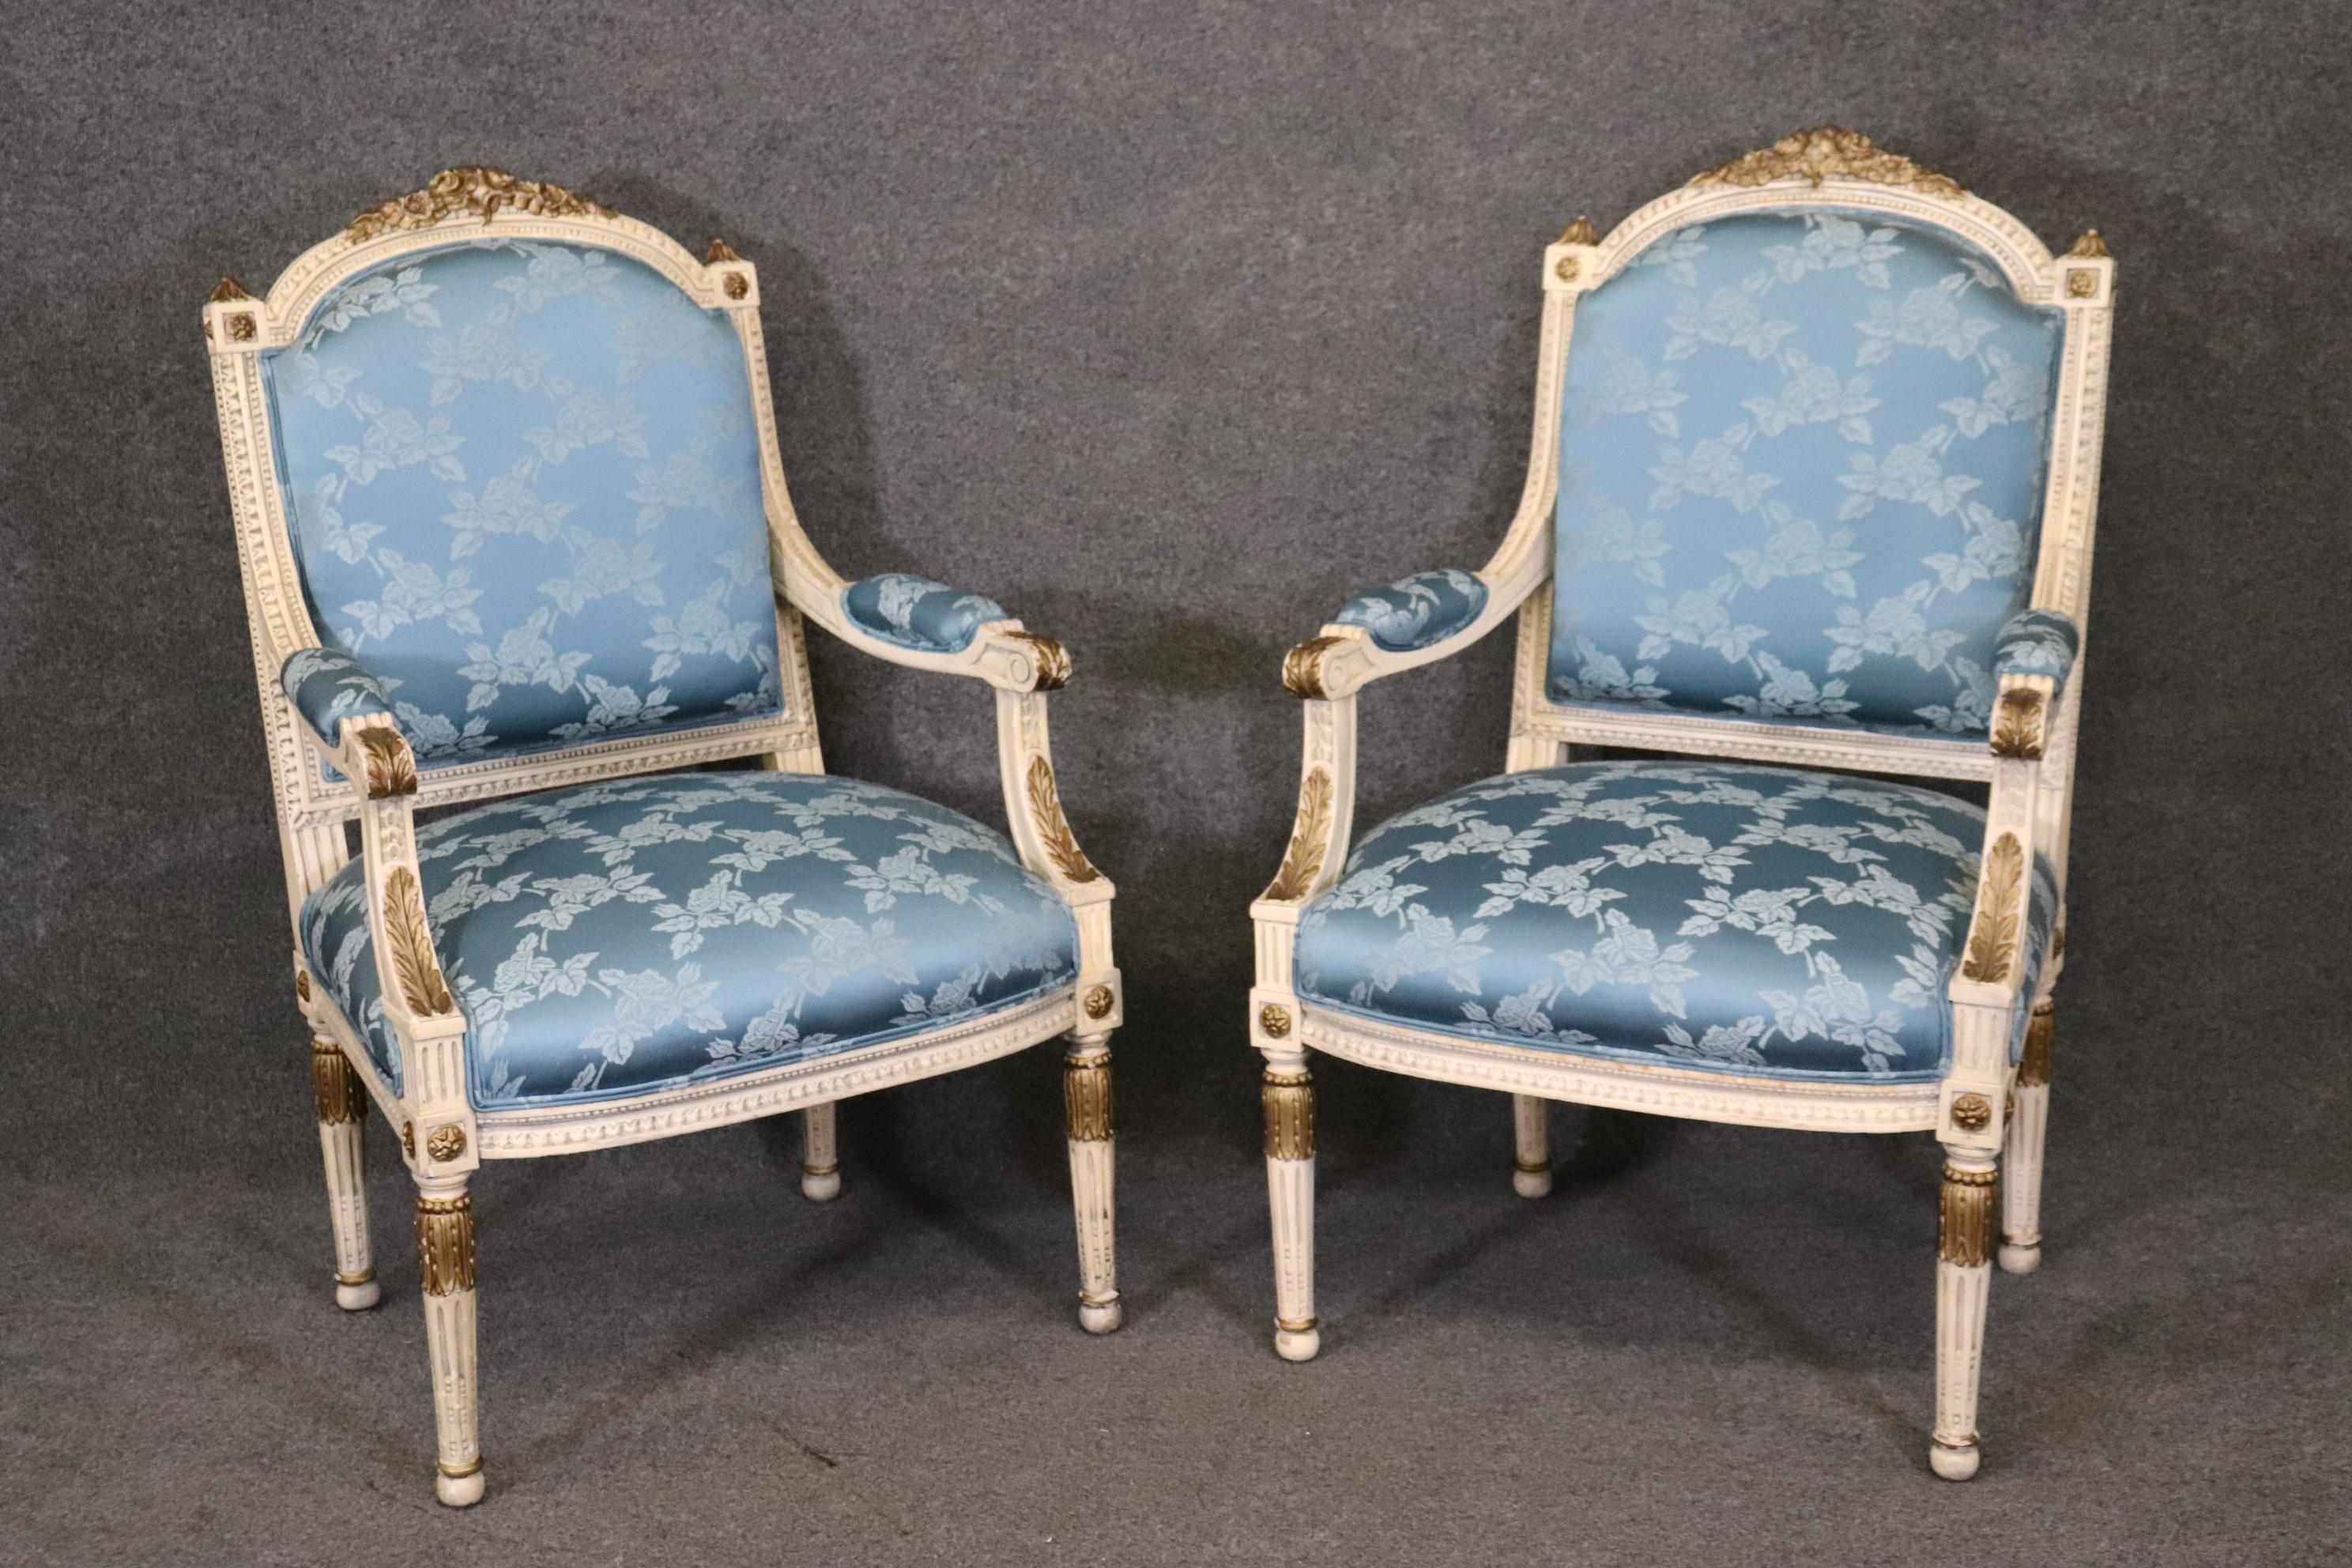 This is one of two pairs we have. They are in good condition and may have signs of wear and use including minor stains here or there but nothing significant or unusual for a pair of 70-80 year old chairs. The carving and painted and gilded finishes